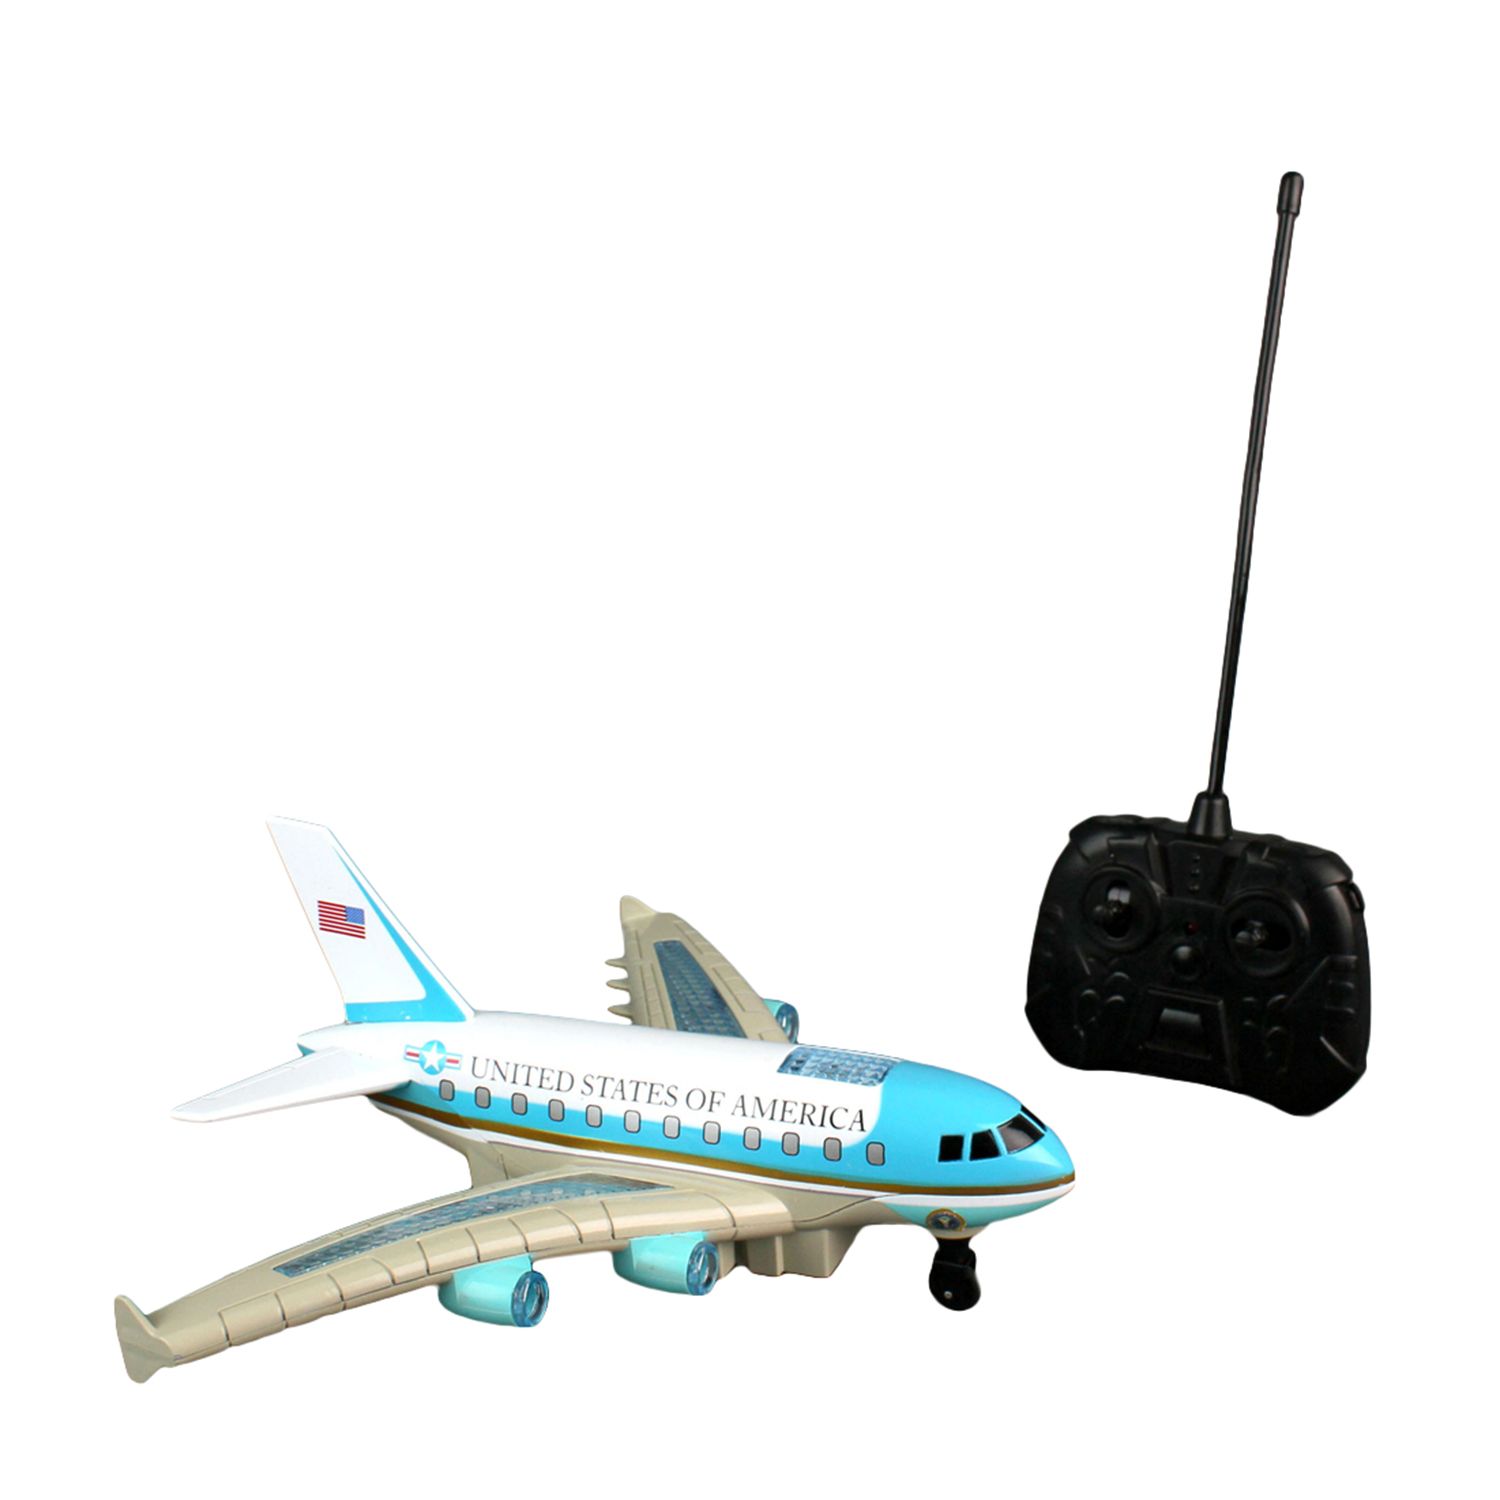 Daron Remote Control Air Force One Plane